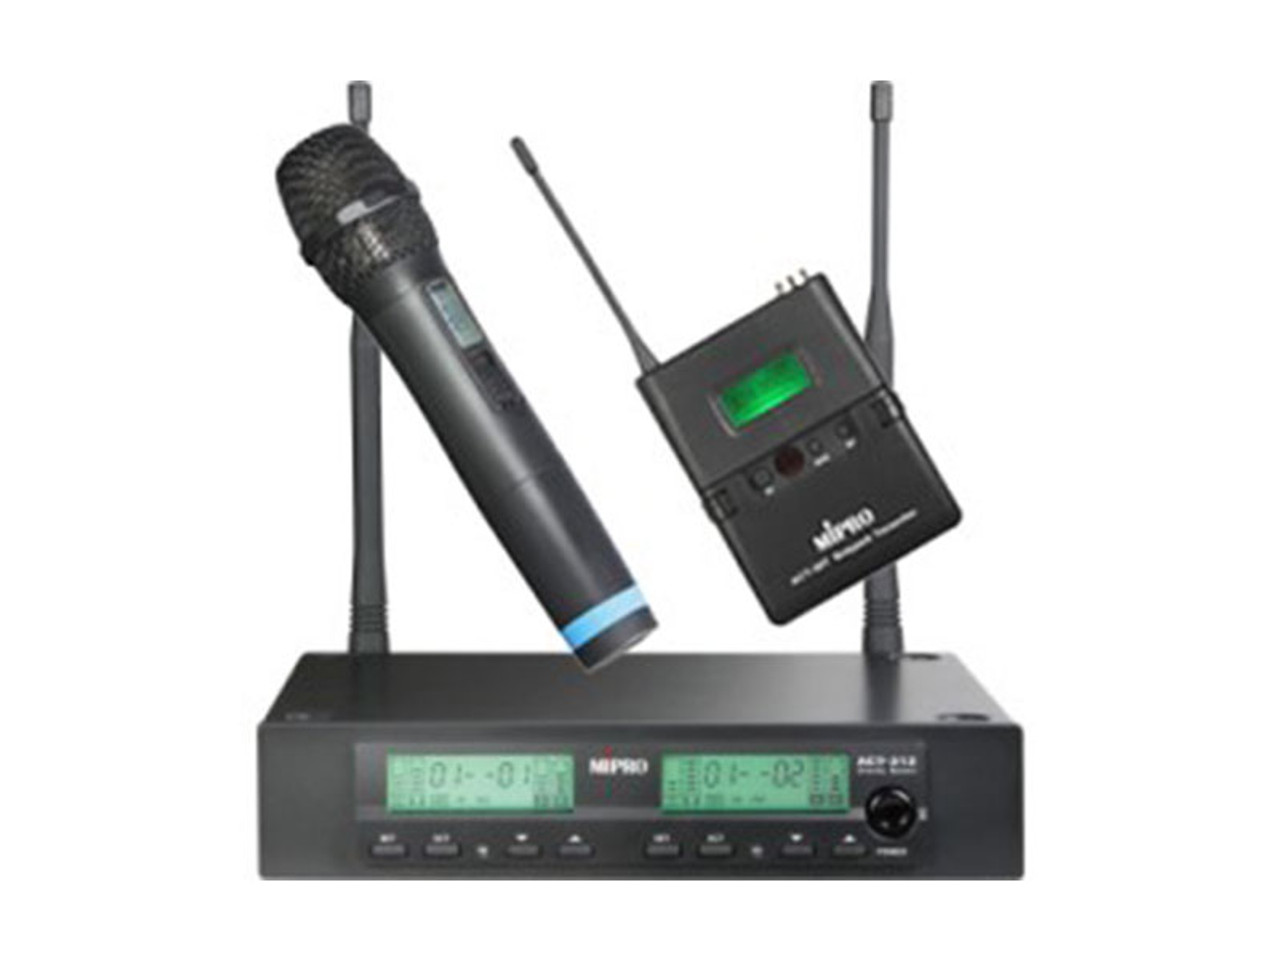  Avlex ACT-312/ACT-32H&T Half-Rack Dual Channel Receiver With Handheld Microphone, Bodypack & Lapel Microphone